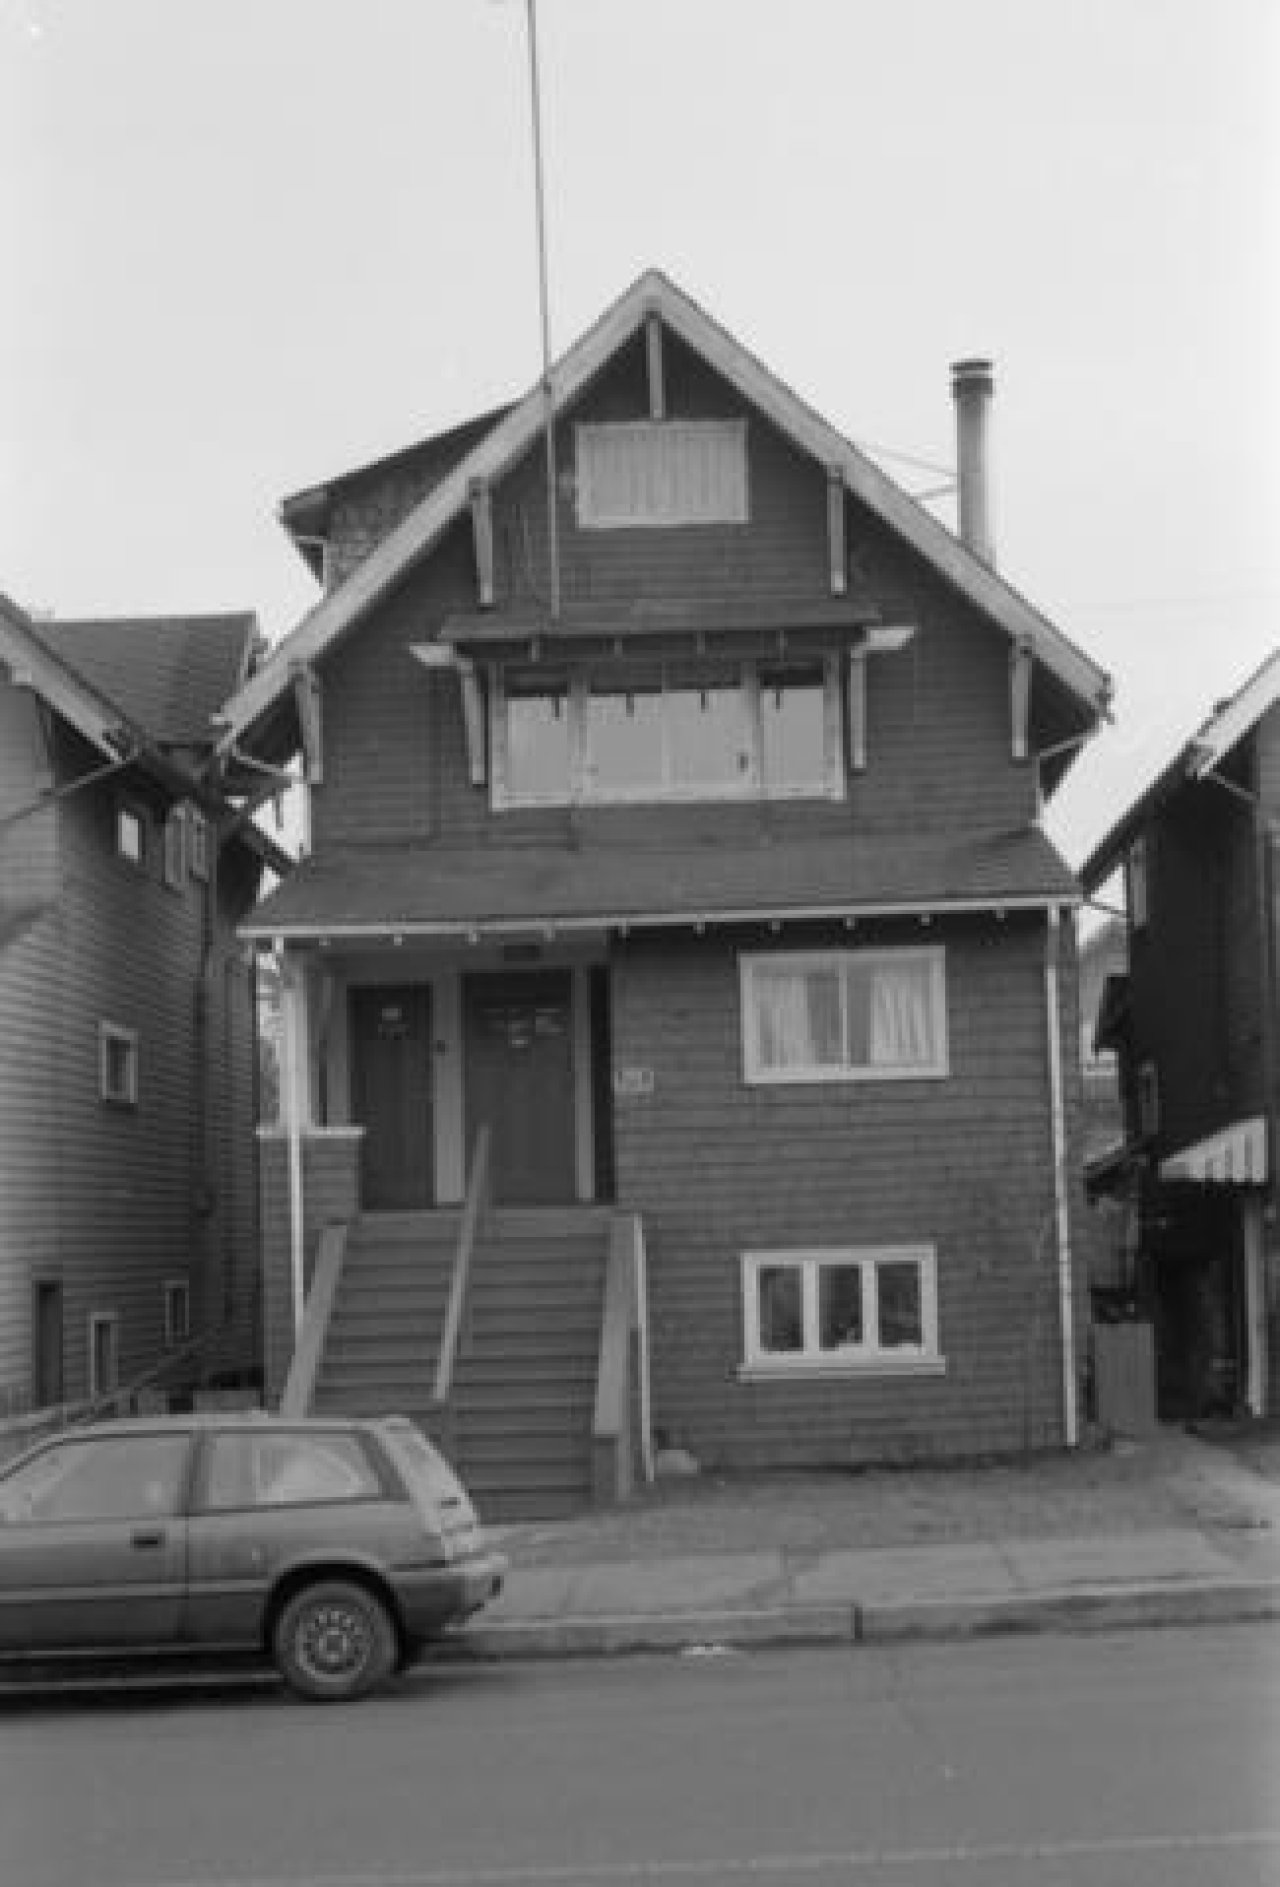 2128 MacDonald St in 1985. Source: City of Vancouver Archives 791 0745_141